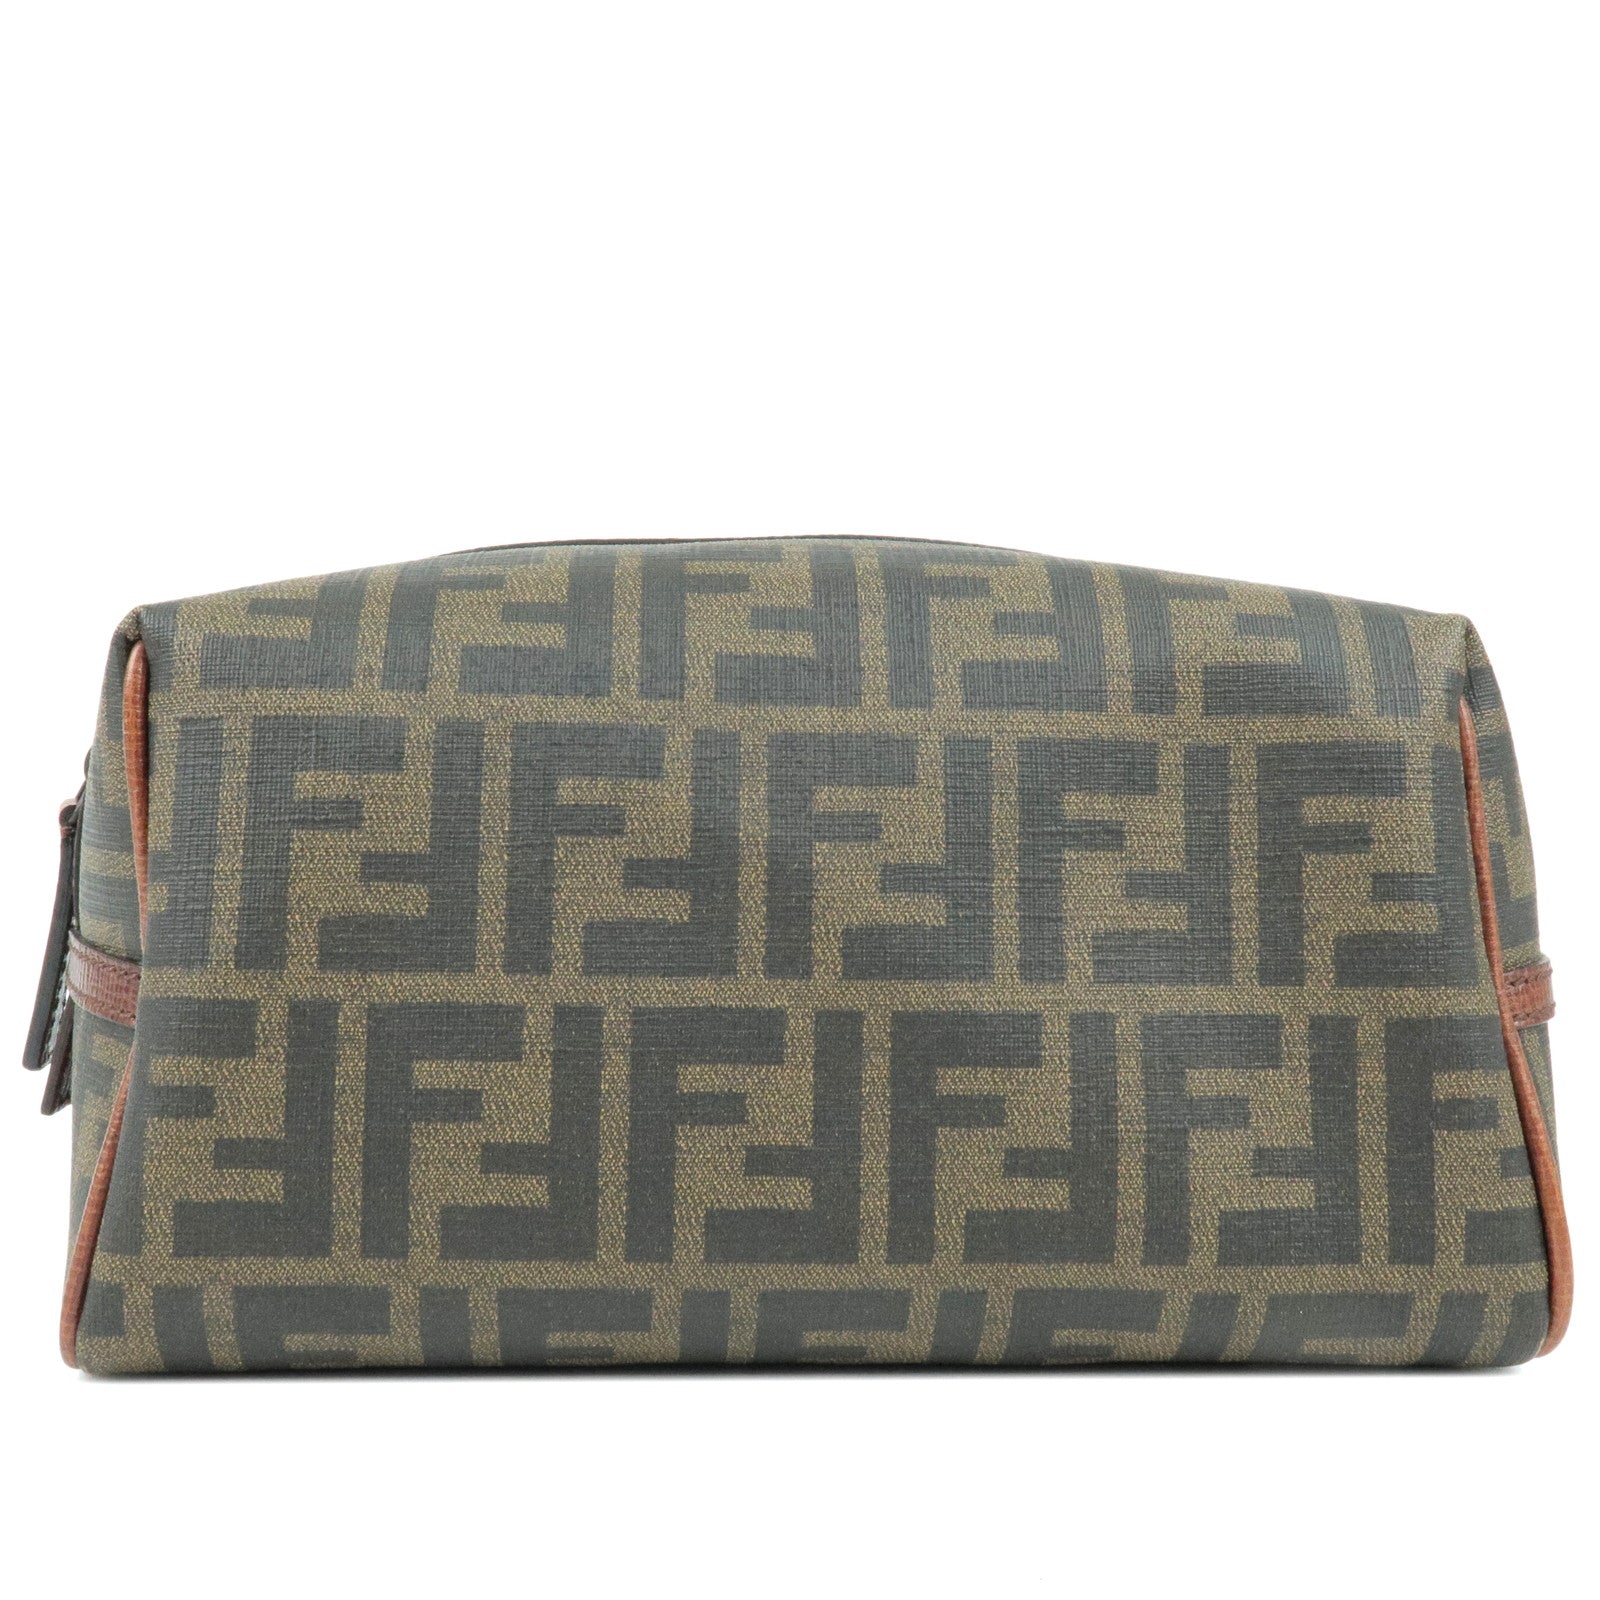 FENDI-Zucca-Print-PVC-Leather-Cosmetic-Pouch-Black-7N0074 – dct-ep_vintage  luxury Store